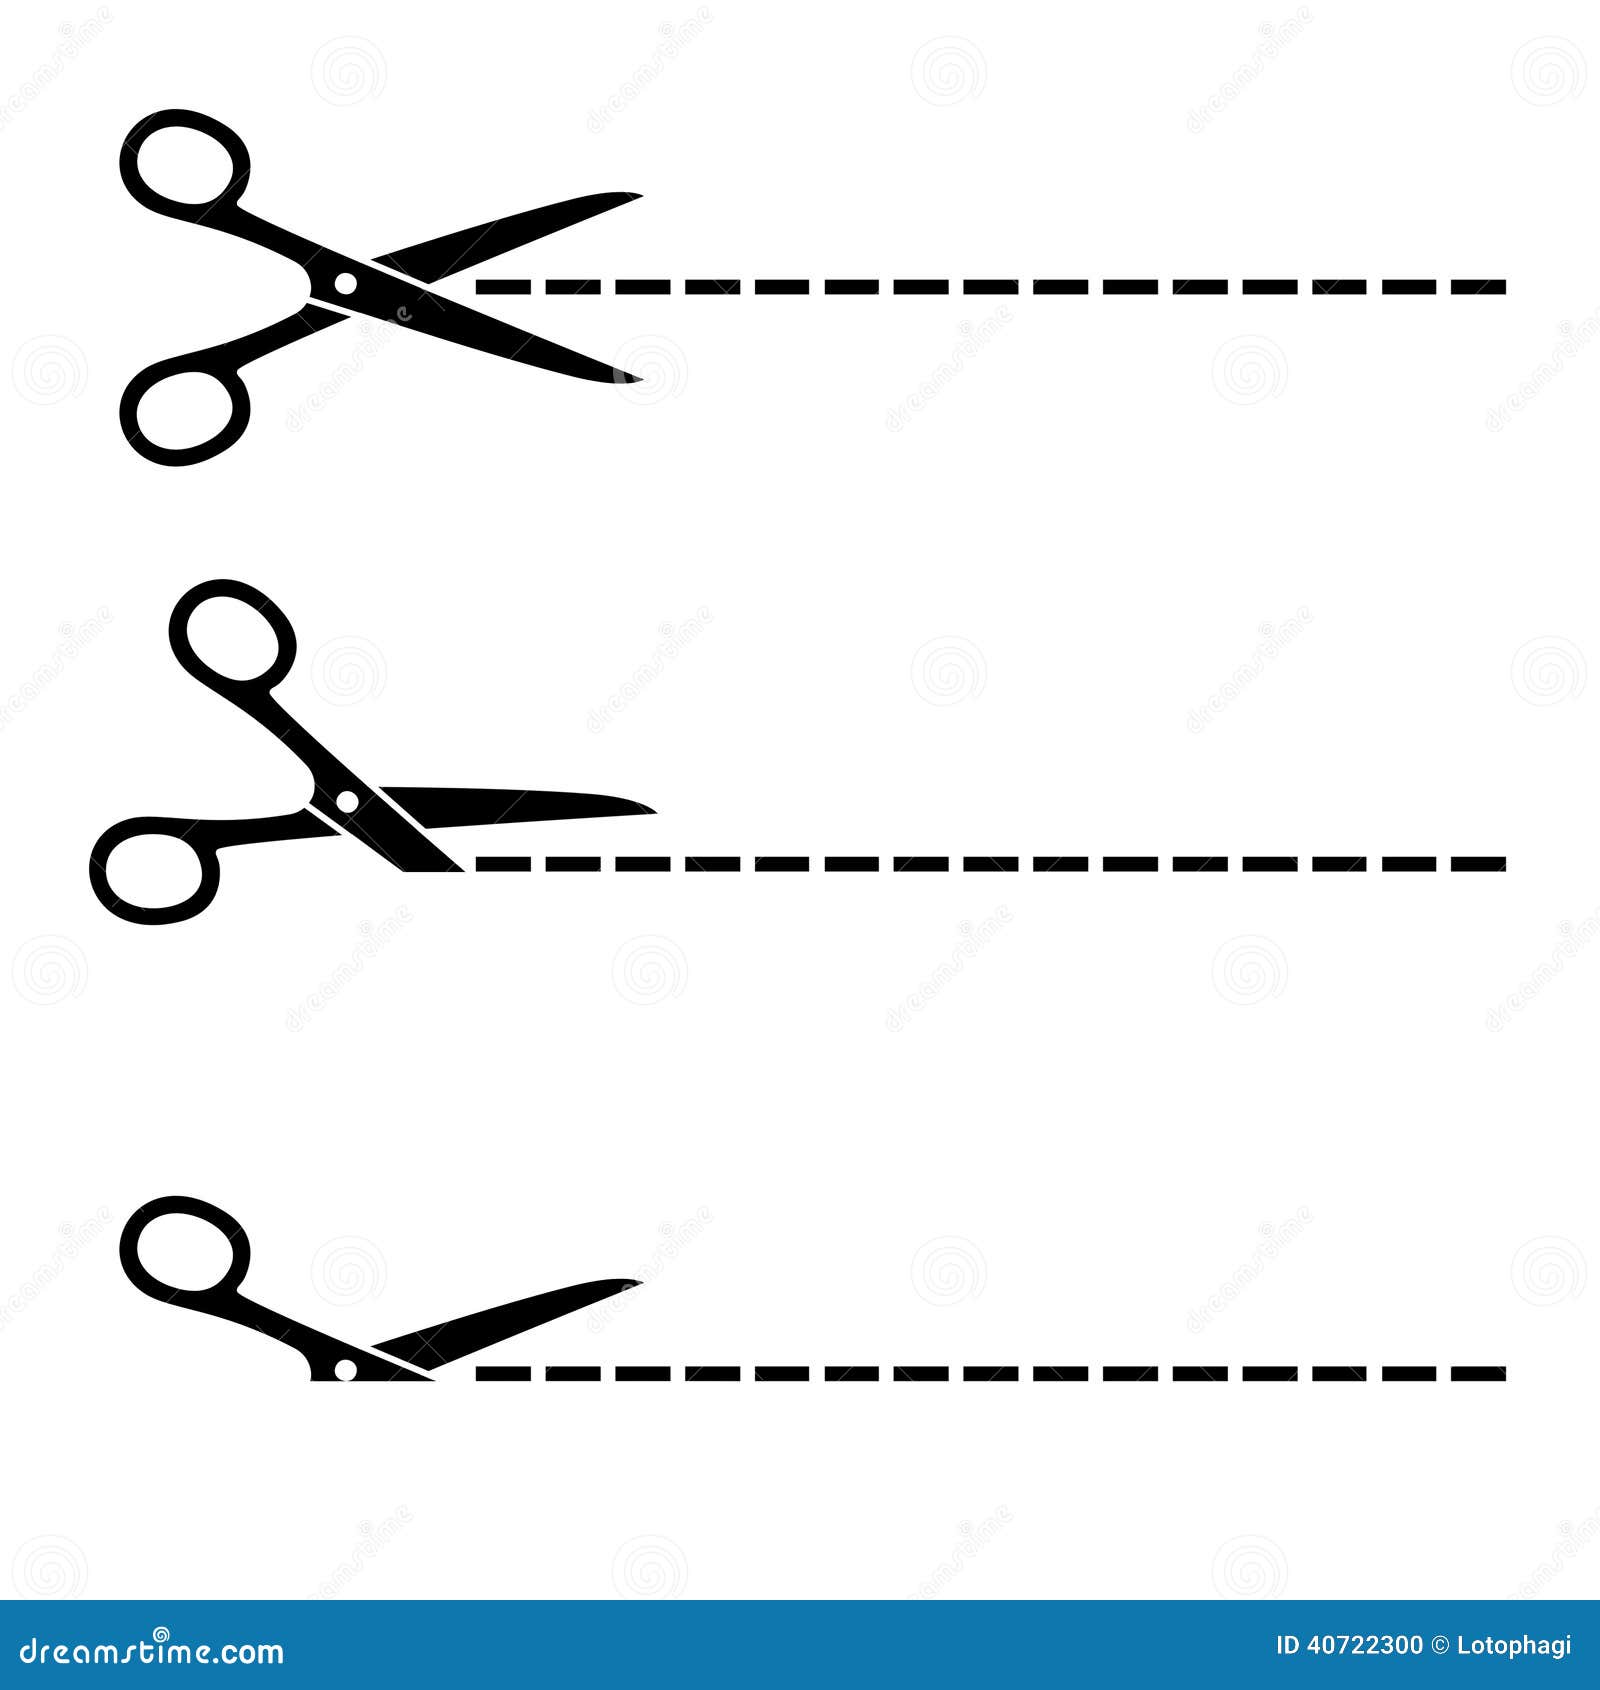 clip art dotted line with scissors - photo #35